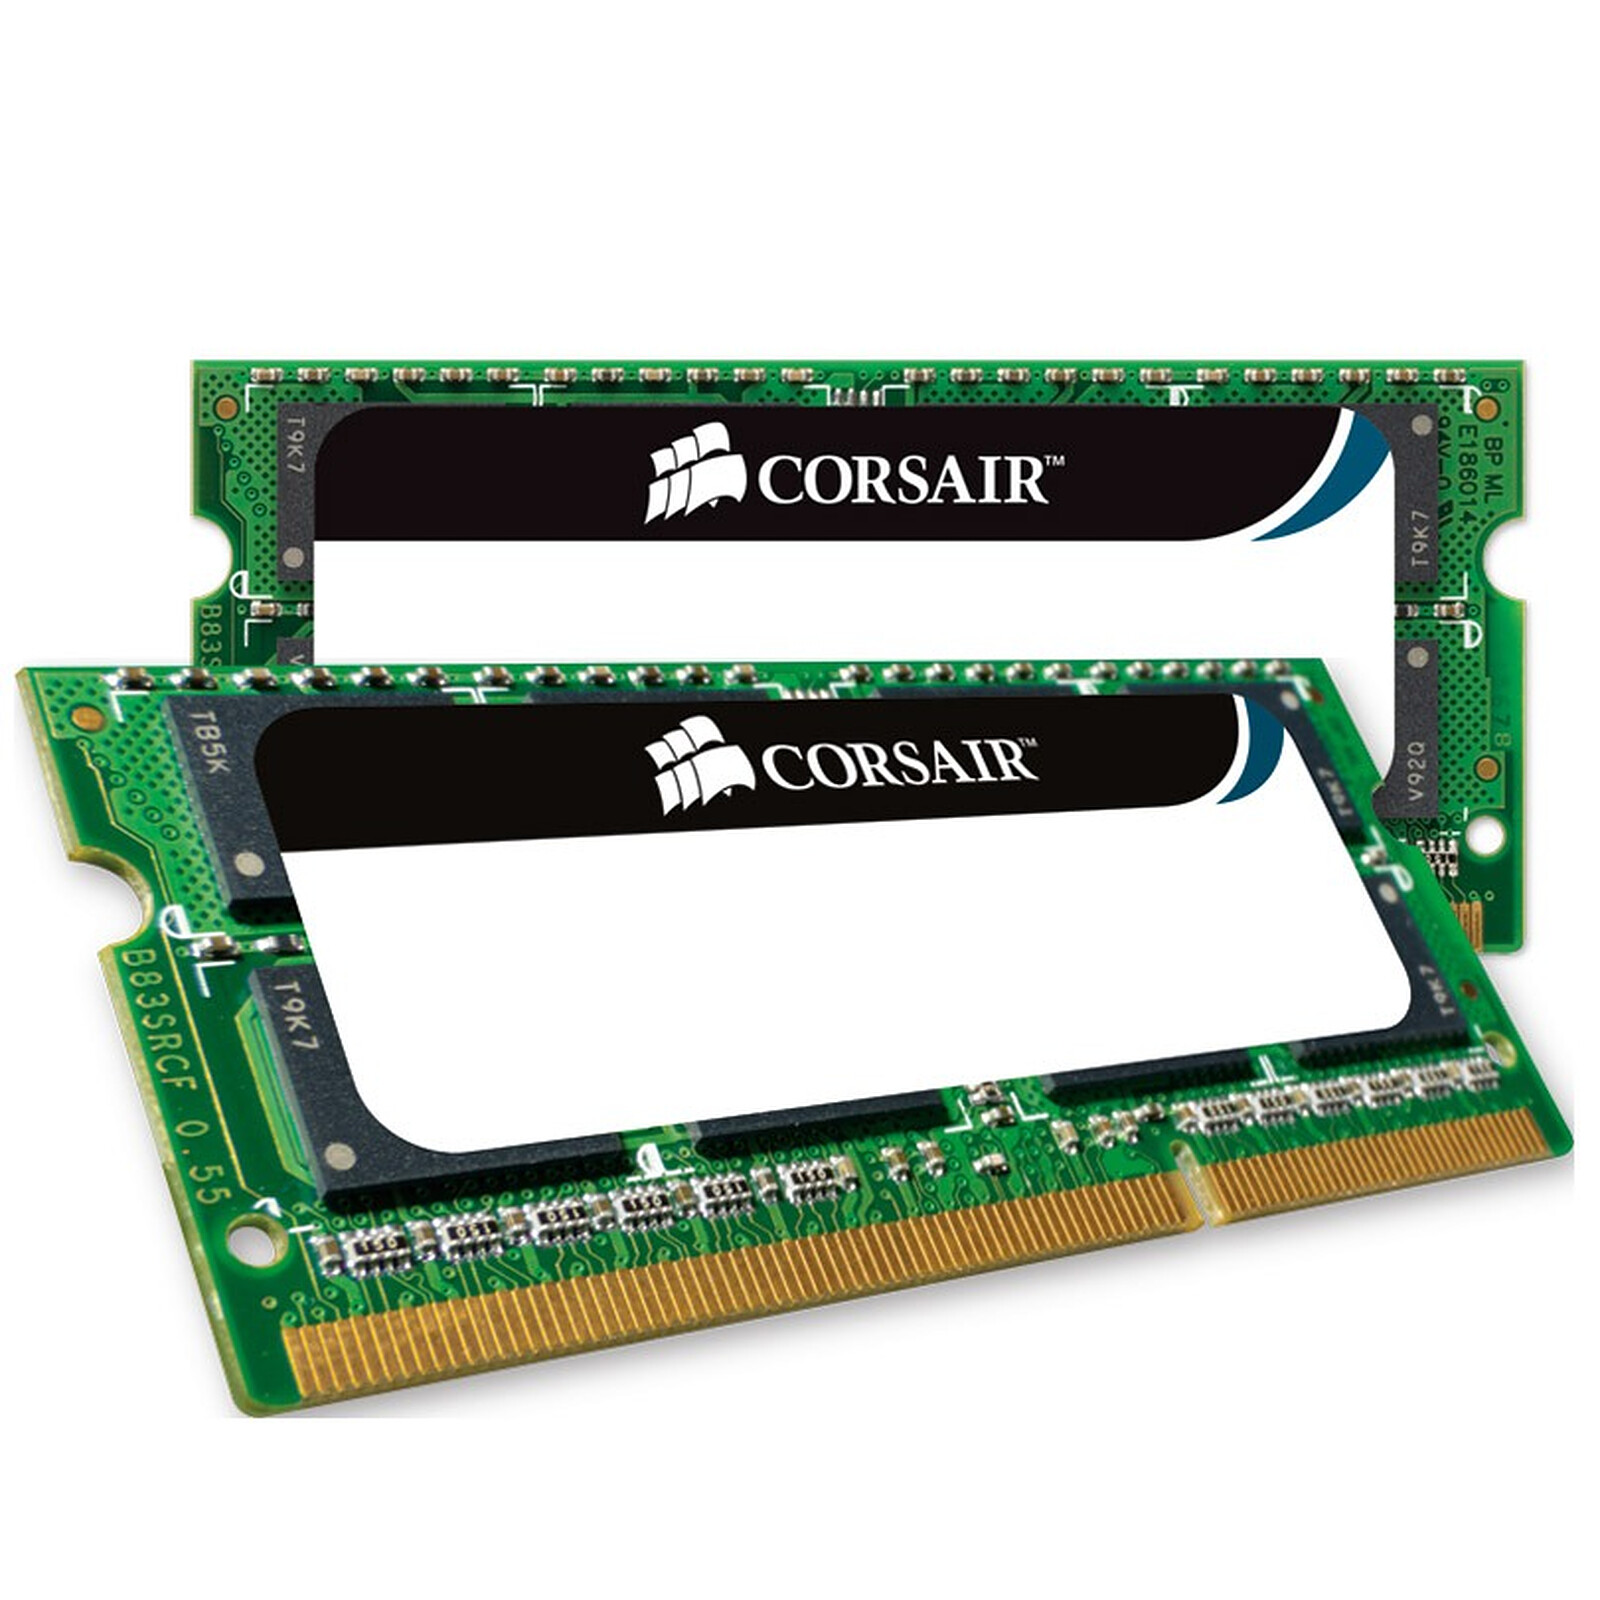 SO-DIMM DDR3L　1600MHz　8GB×2　CORSAIRPC/タブレット